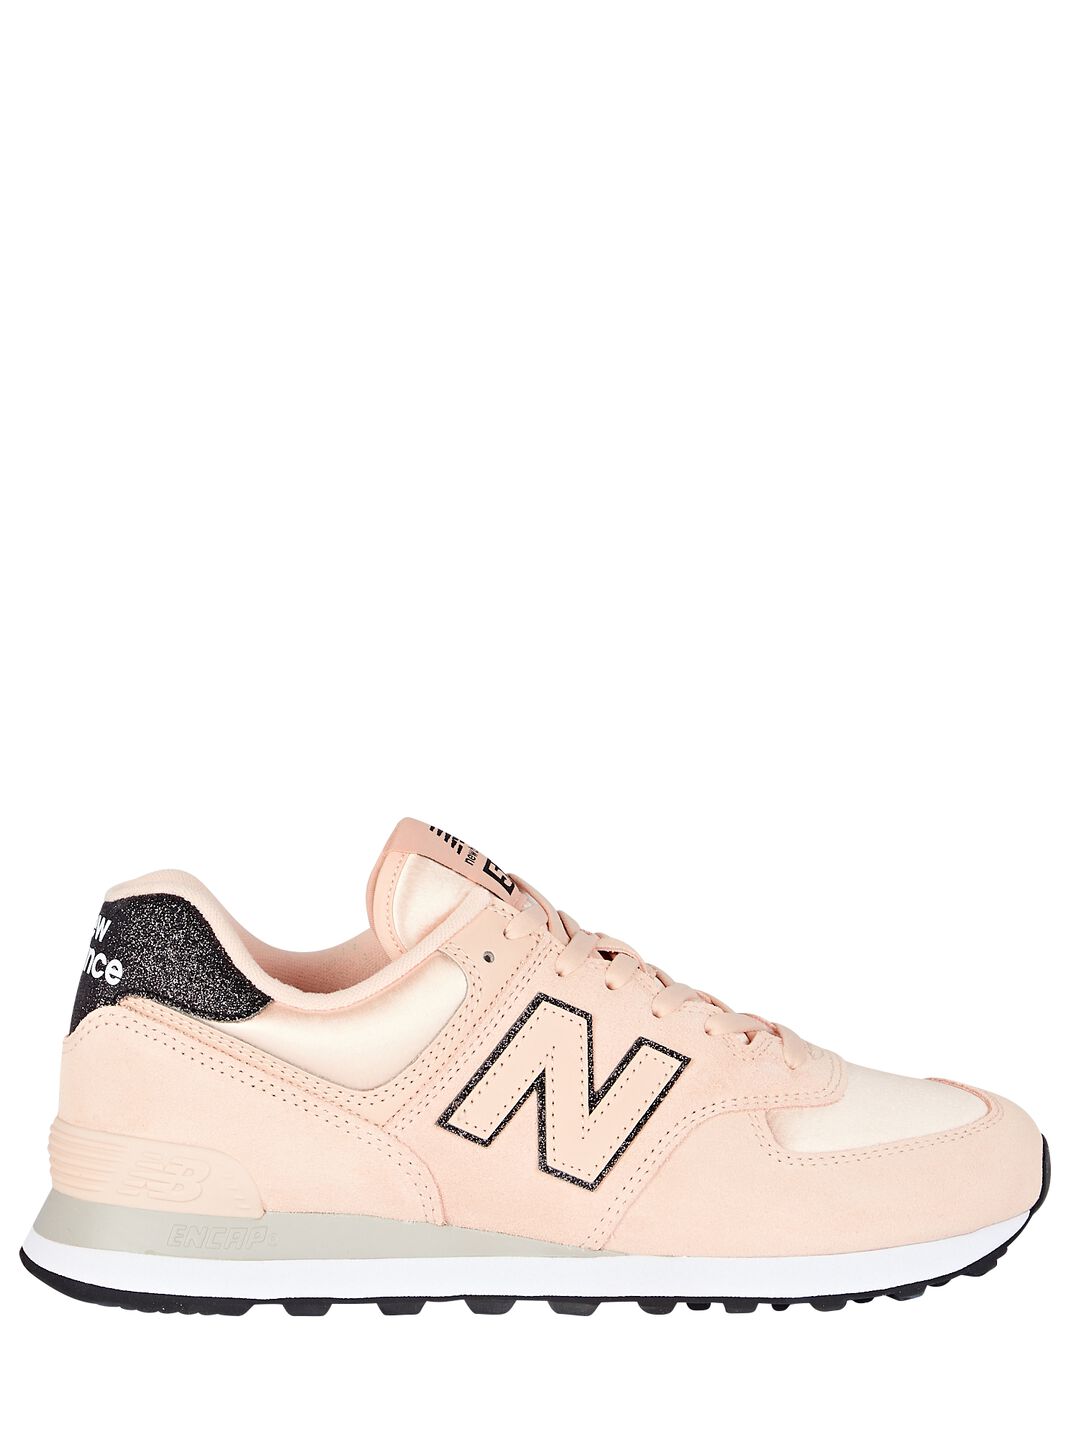 New Balance Classic 574 Core Sneakers |